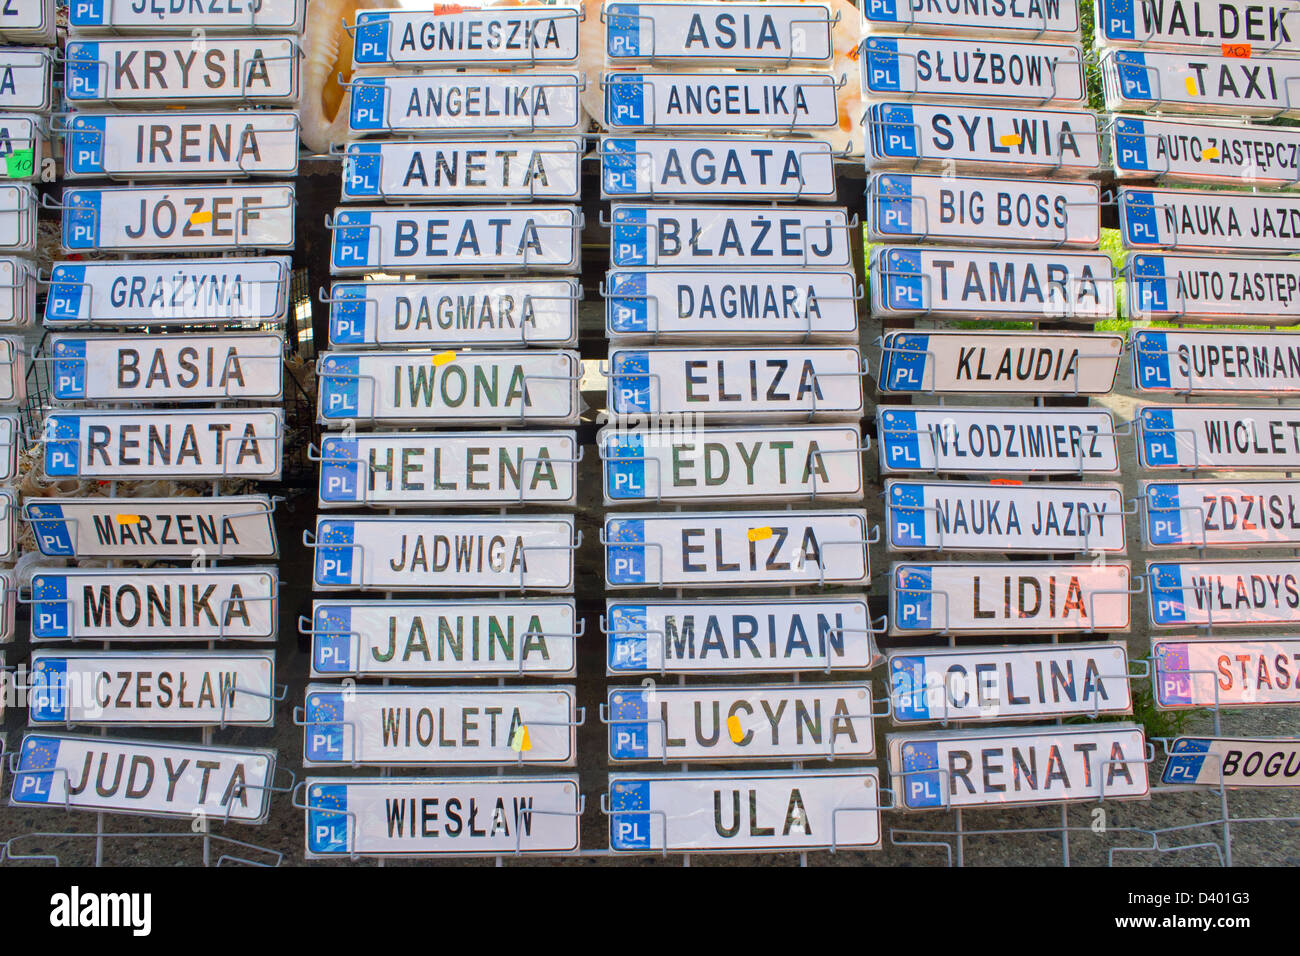 Horst, Poland, name badges in the form of license plates Stock Photo